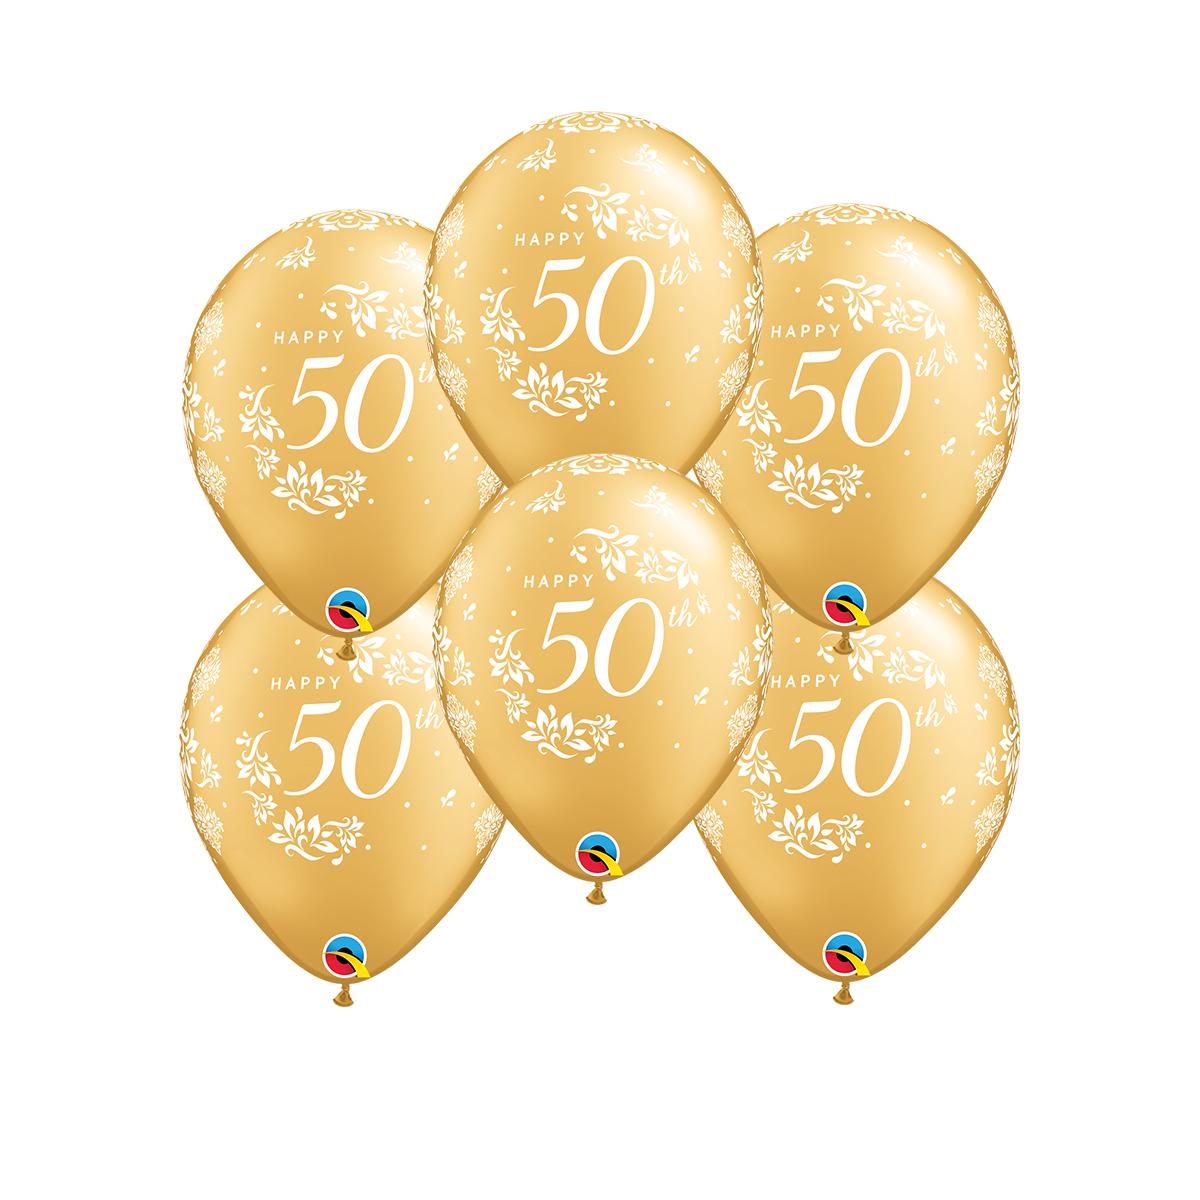 6 Inflated Golden Wedding Anniversary Latex Balloons